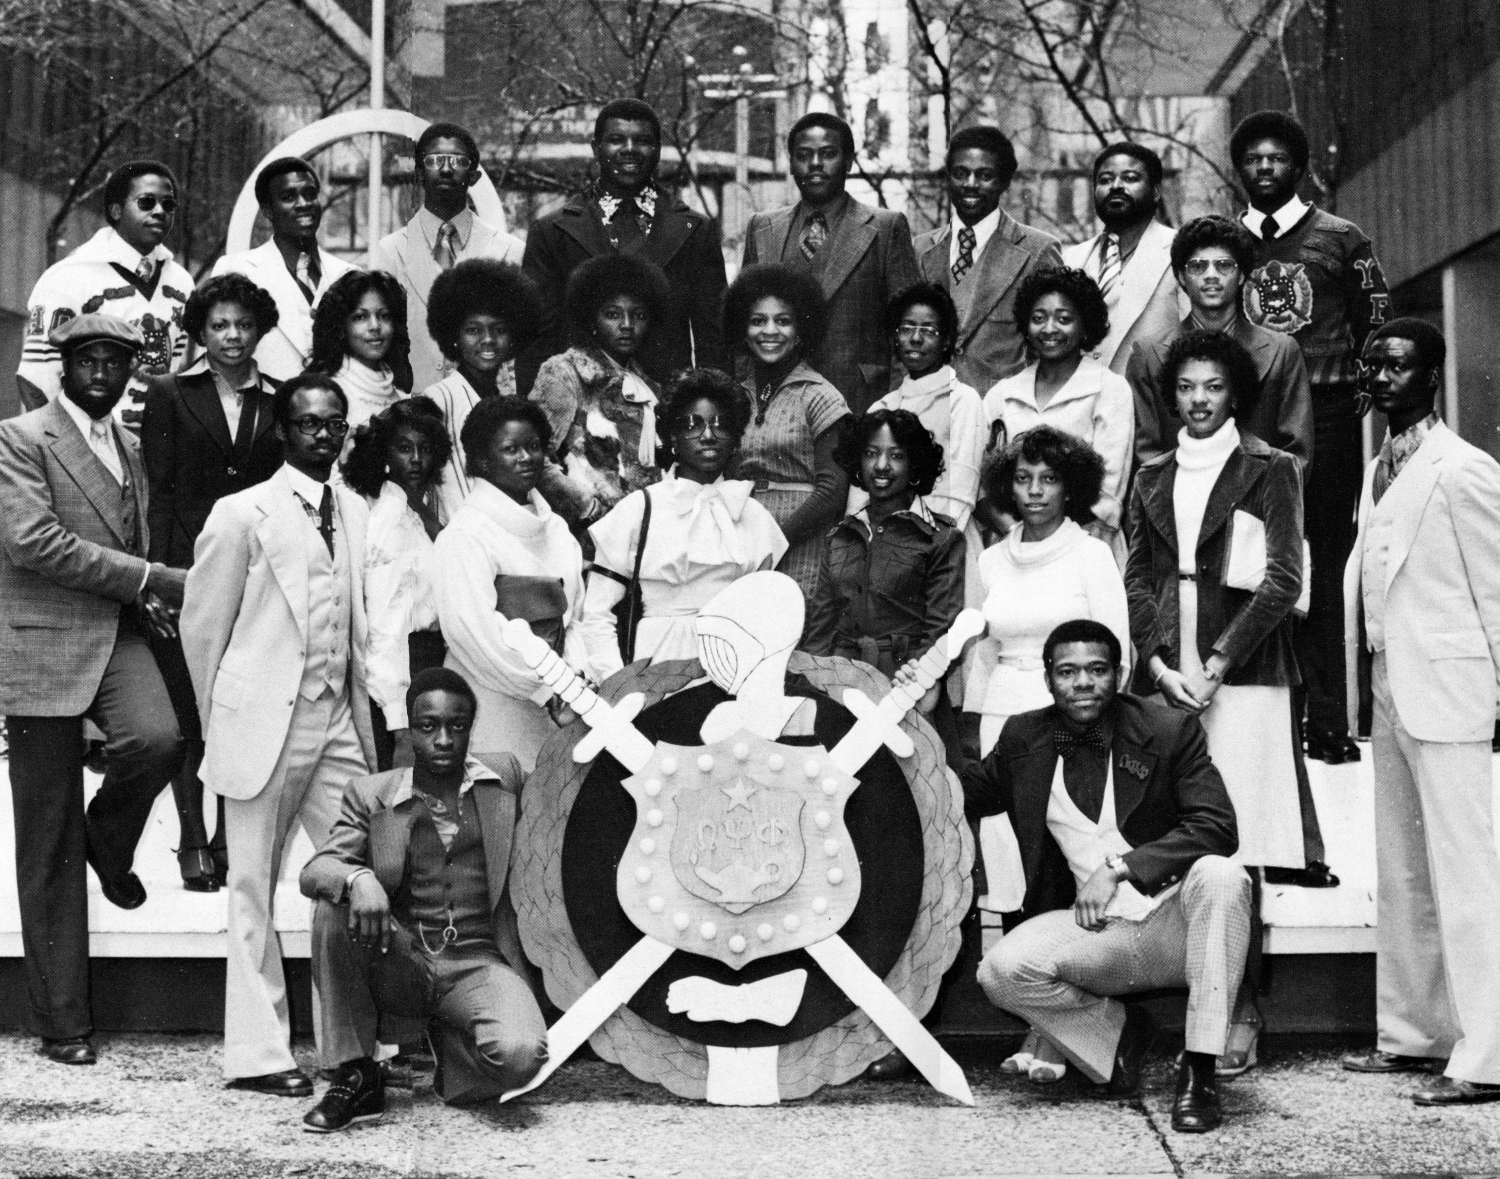 Omega Psi Phi, a National Pan-Hellenic Council fraternity, was founded at Georgia Tech in 1978